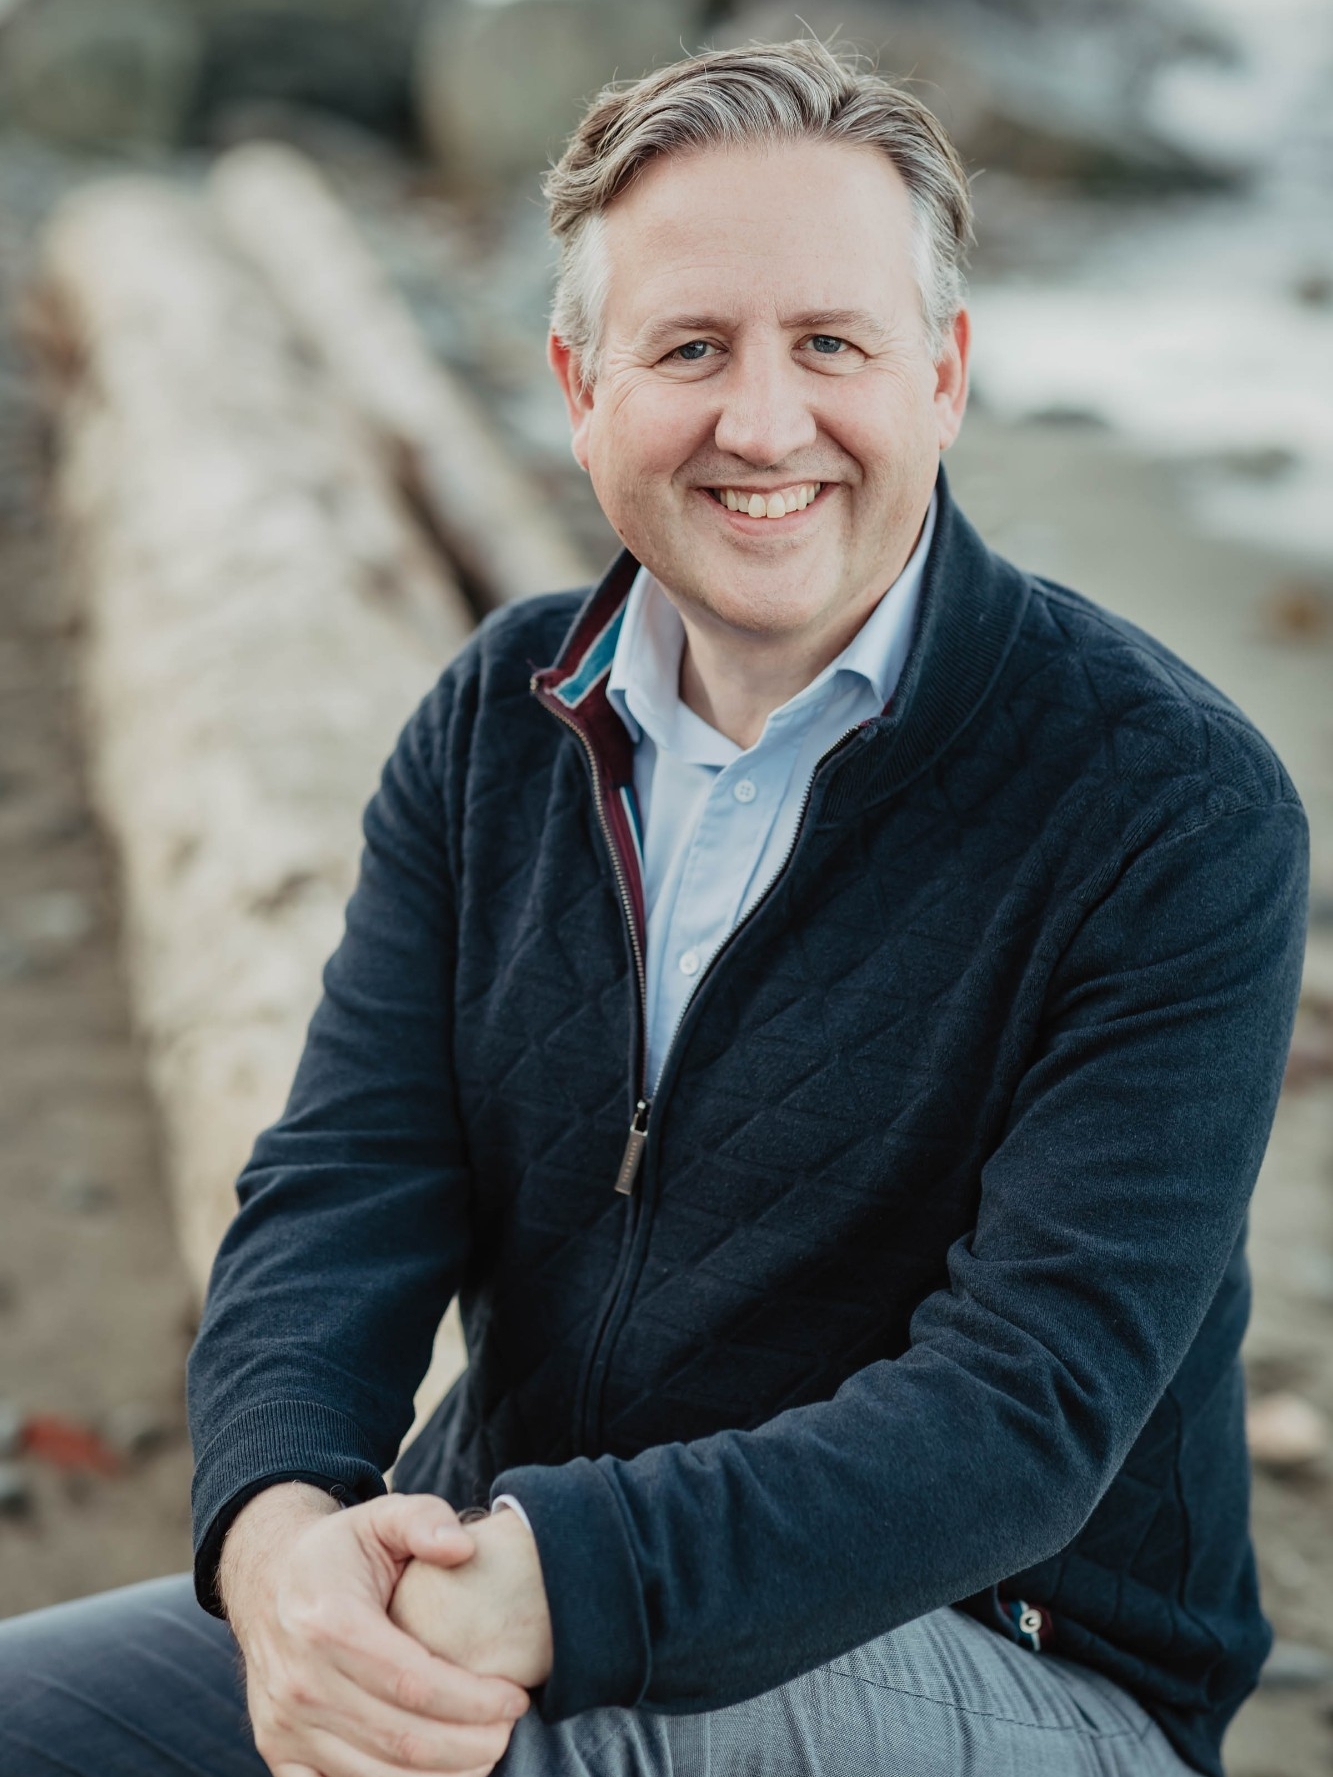 Kennedy Stewart sitting on a log on a beach, blurred in the background. He has gray hair and is smiling towards the camera. Kennedy is wearing a blue zip up coat with a blue button down underneath.